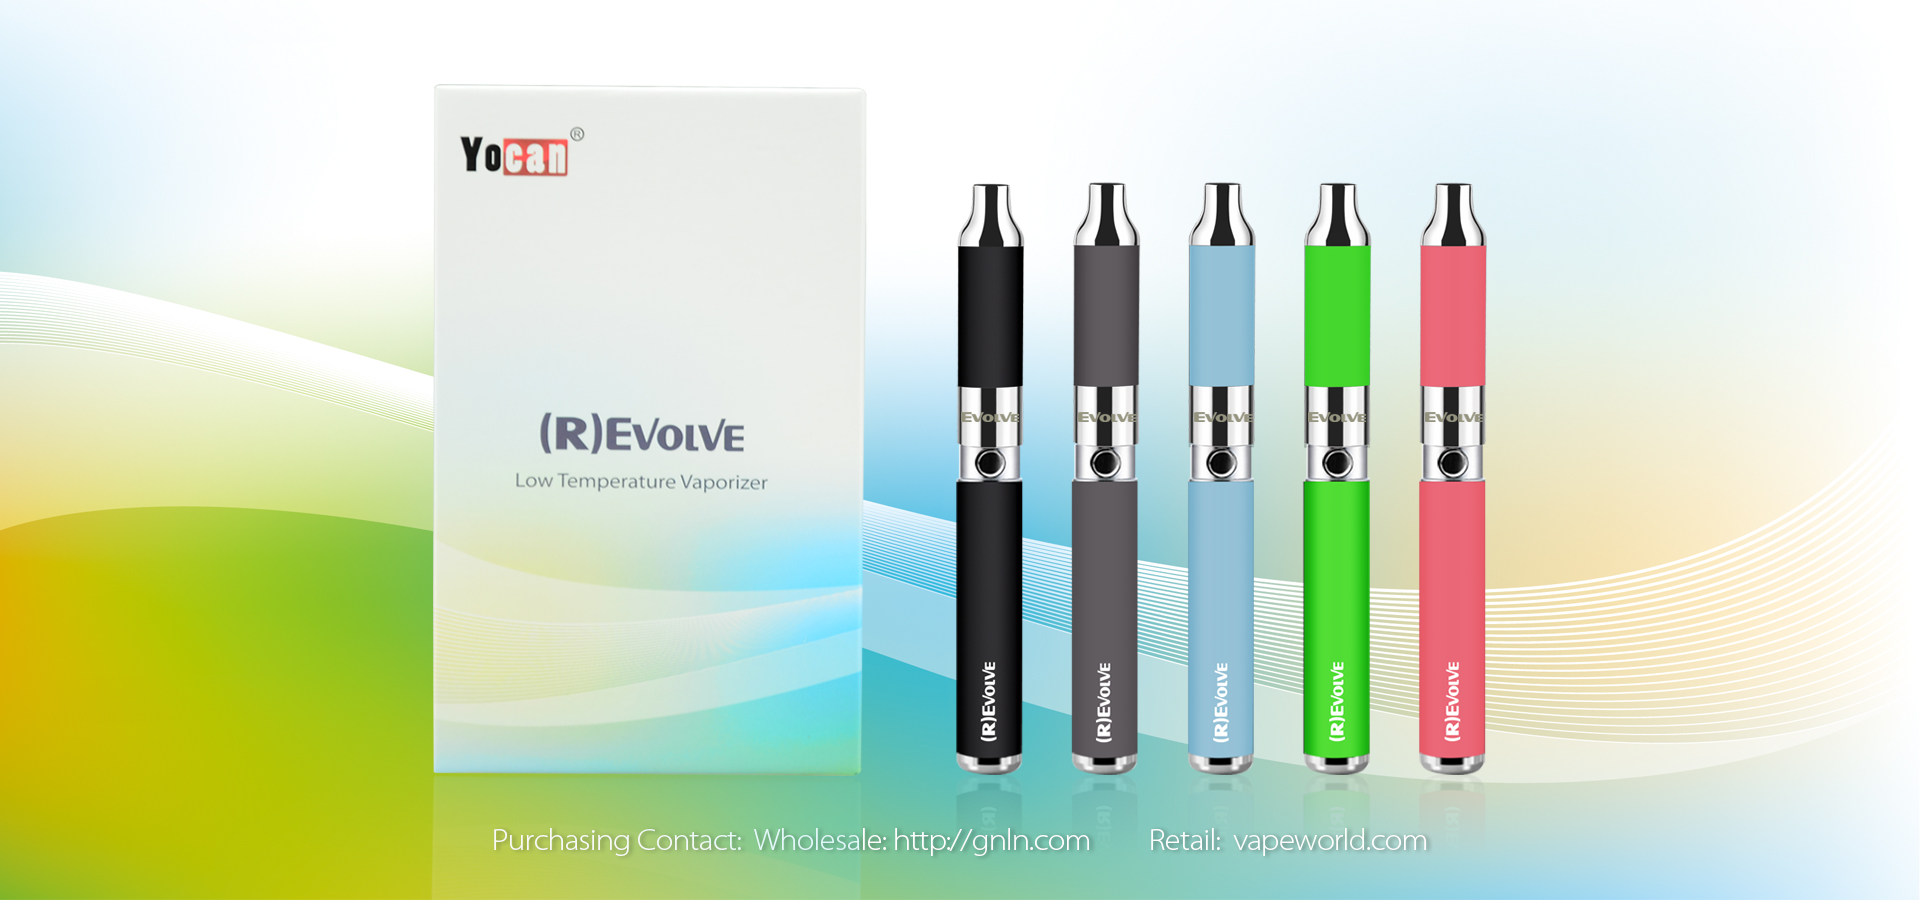 Yocan (R)Evolve Vaporizer is an upgraded version of the original Evolve, now featuring a unique low-temperature heating system